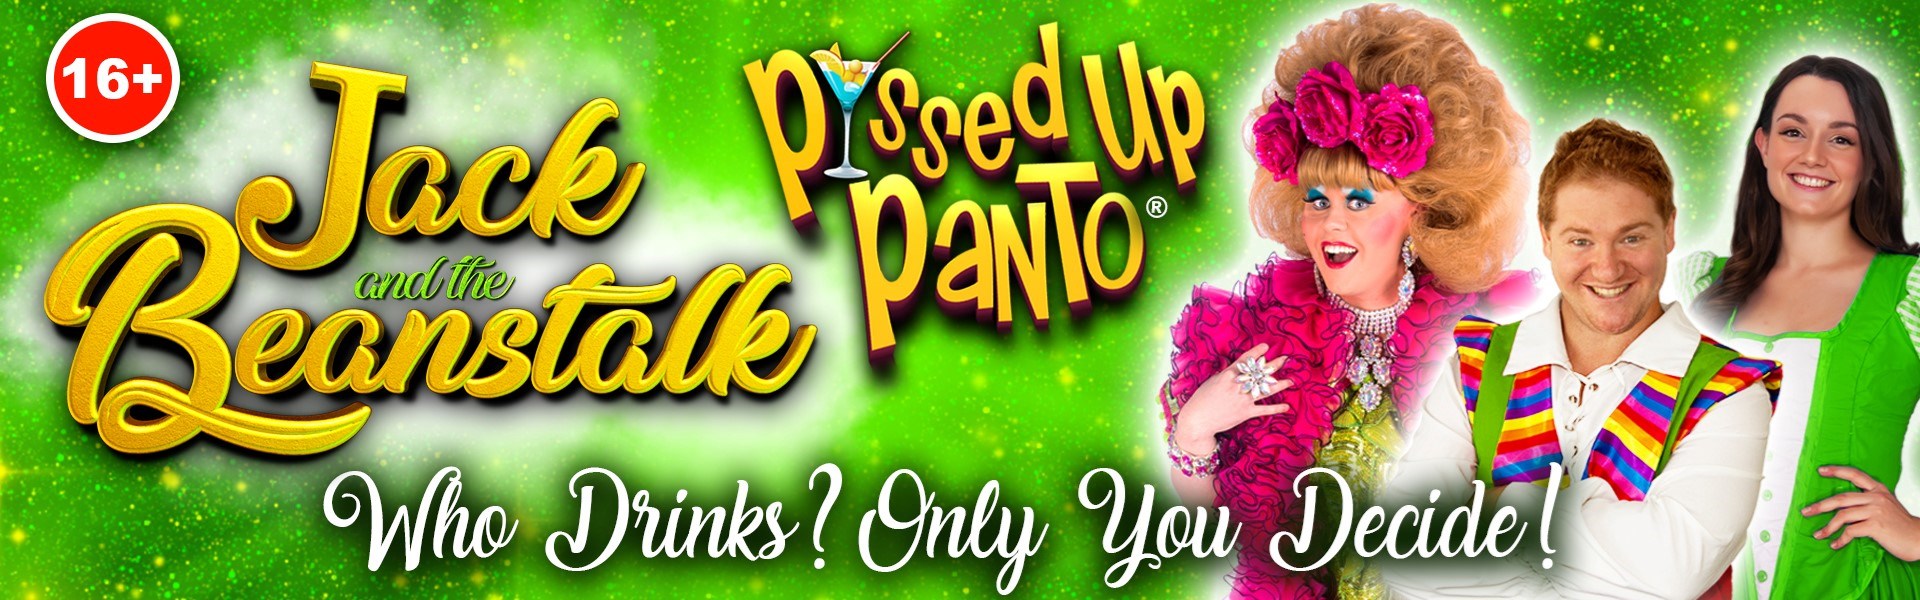 P*ssed Up Panto - Jack & The Beanstalk